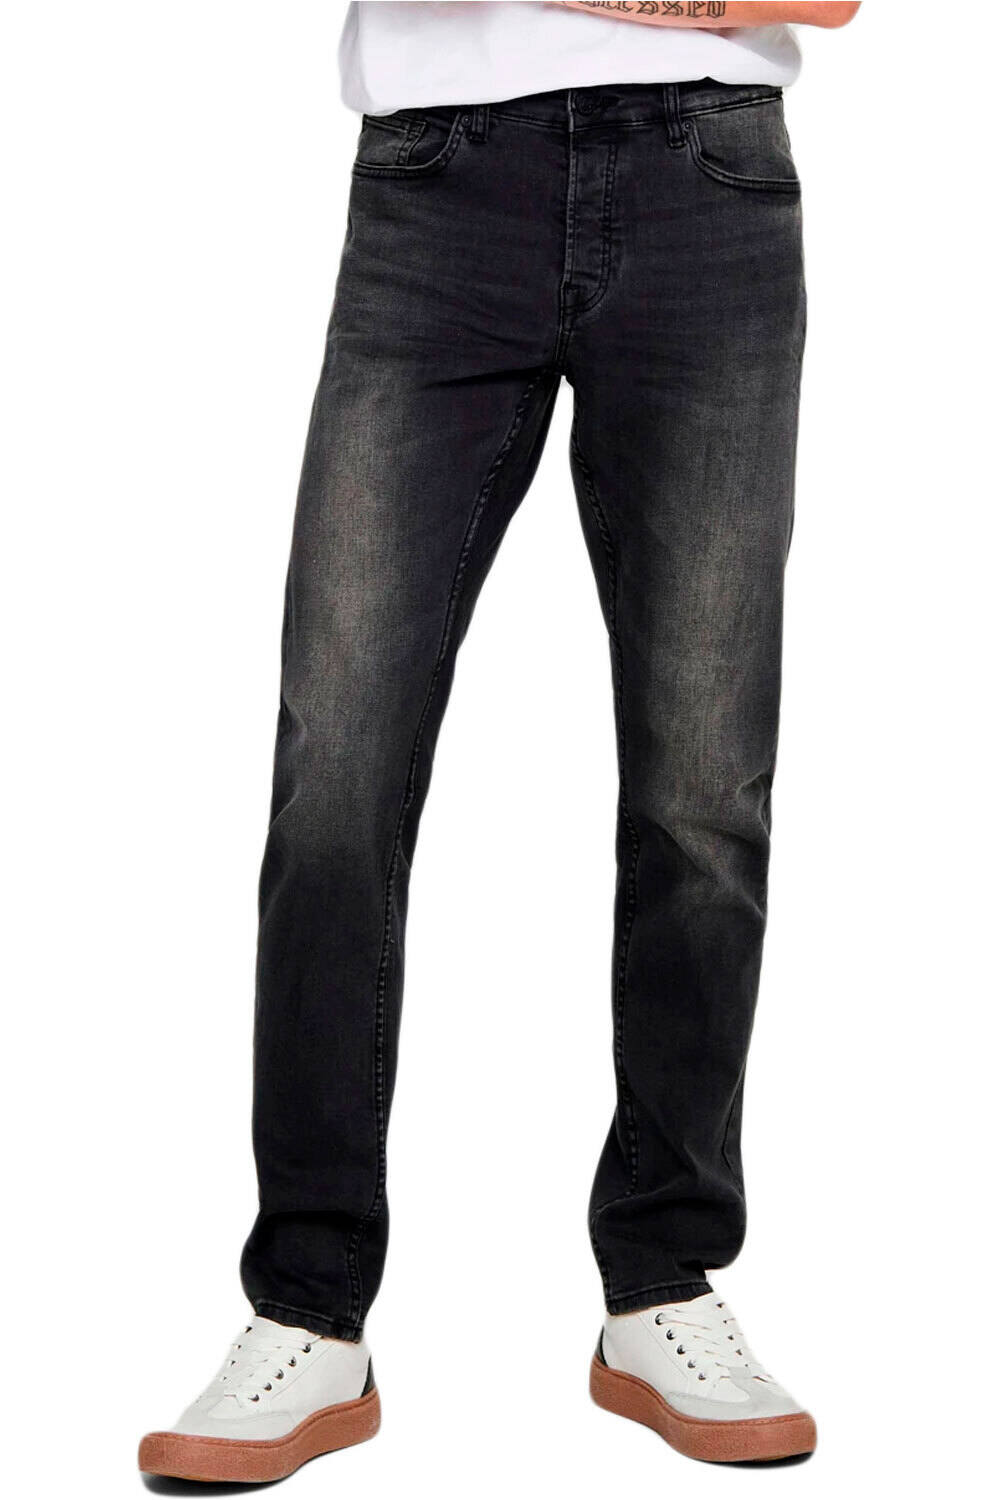 Only&Sons pantalón hombre ONSLOOM BLACK WASHED DCC 0447 NOOS vista frontal